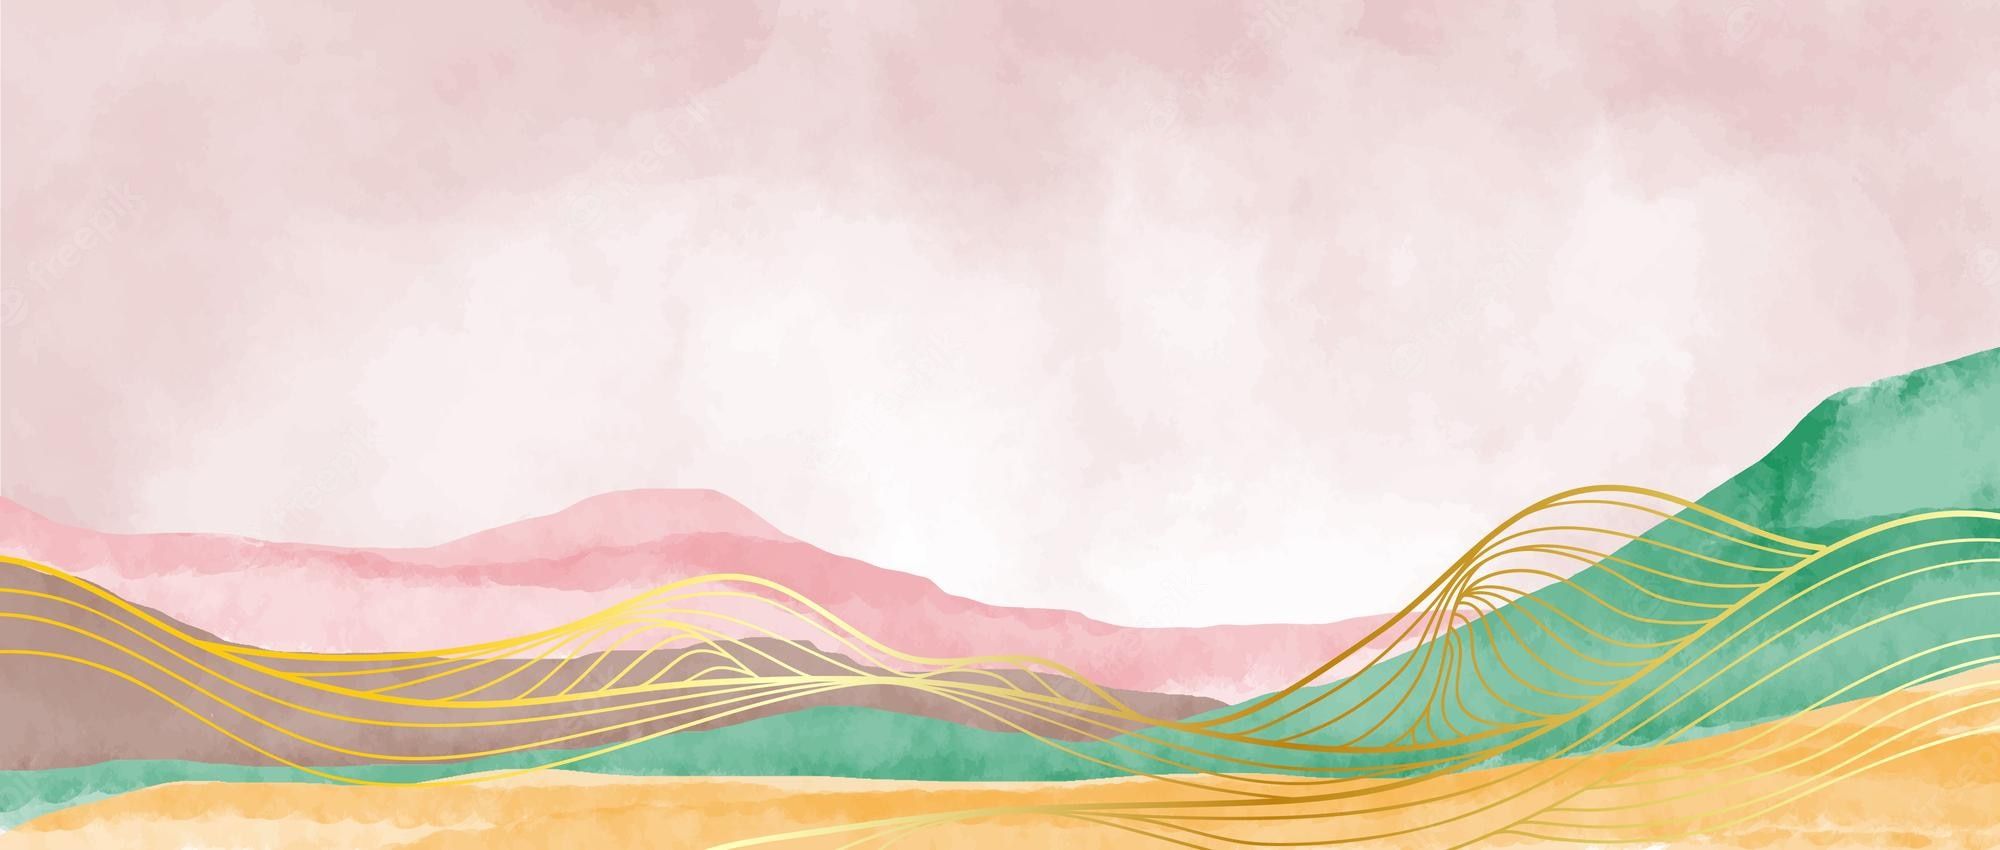 Premium Vector. Mountain landscape with watercolor brush and golden line art print abstract mountain contemporary aesthetic background landscapes vector illustrations